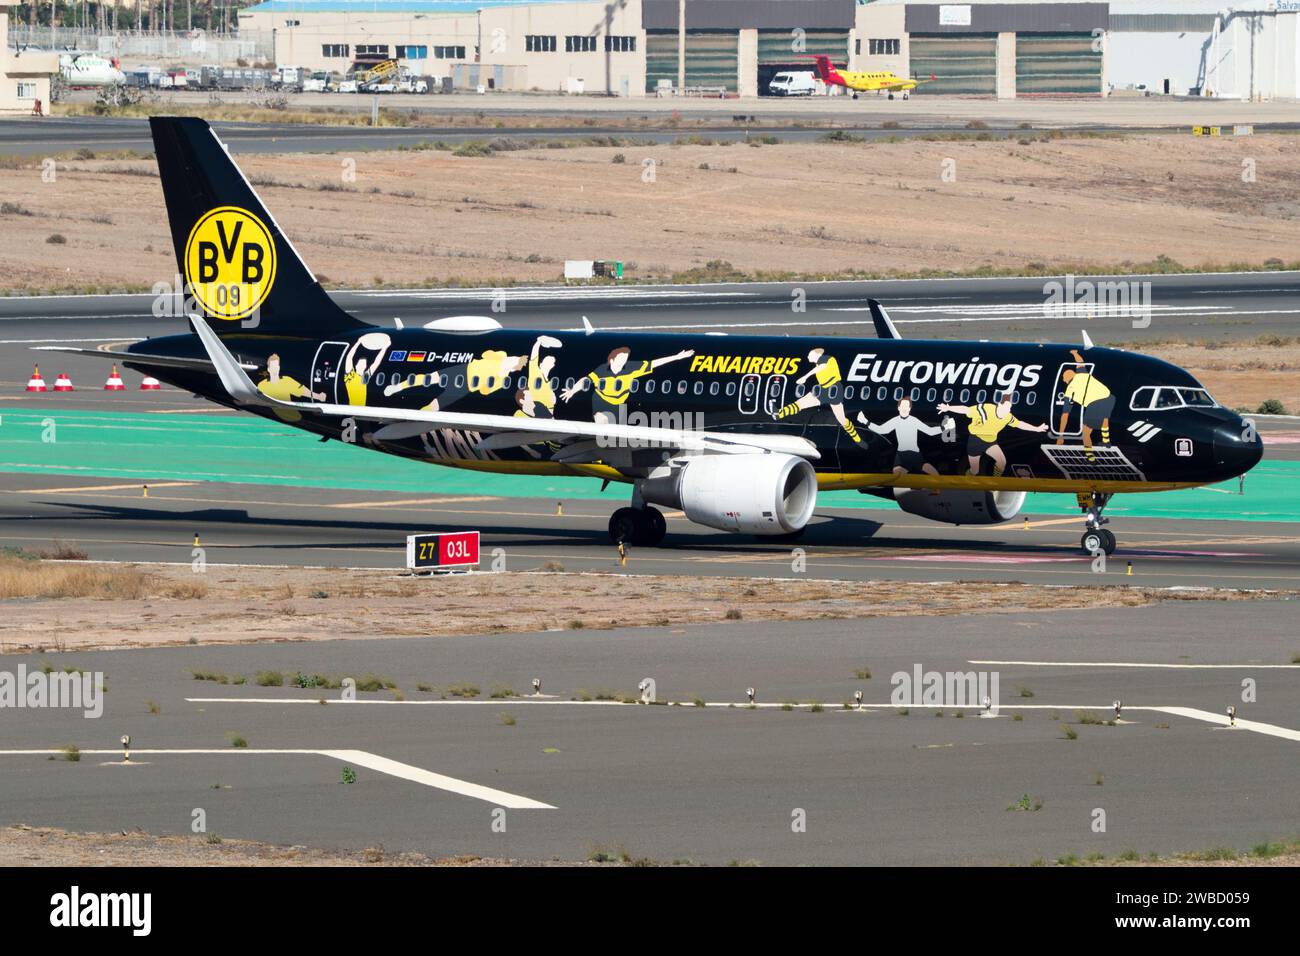 Airbus A320 airliner of the Eurowings airline with special paint BVB Fanairbus Stock Photo